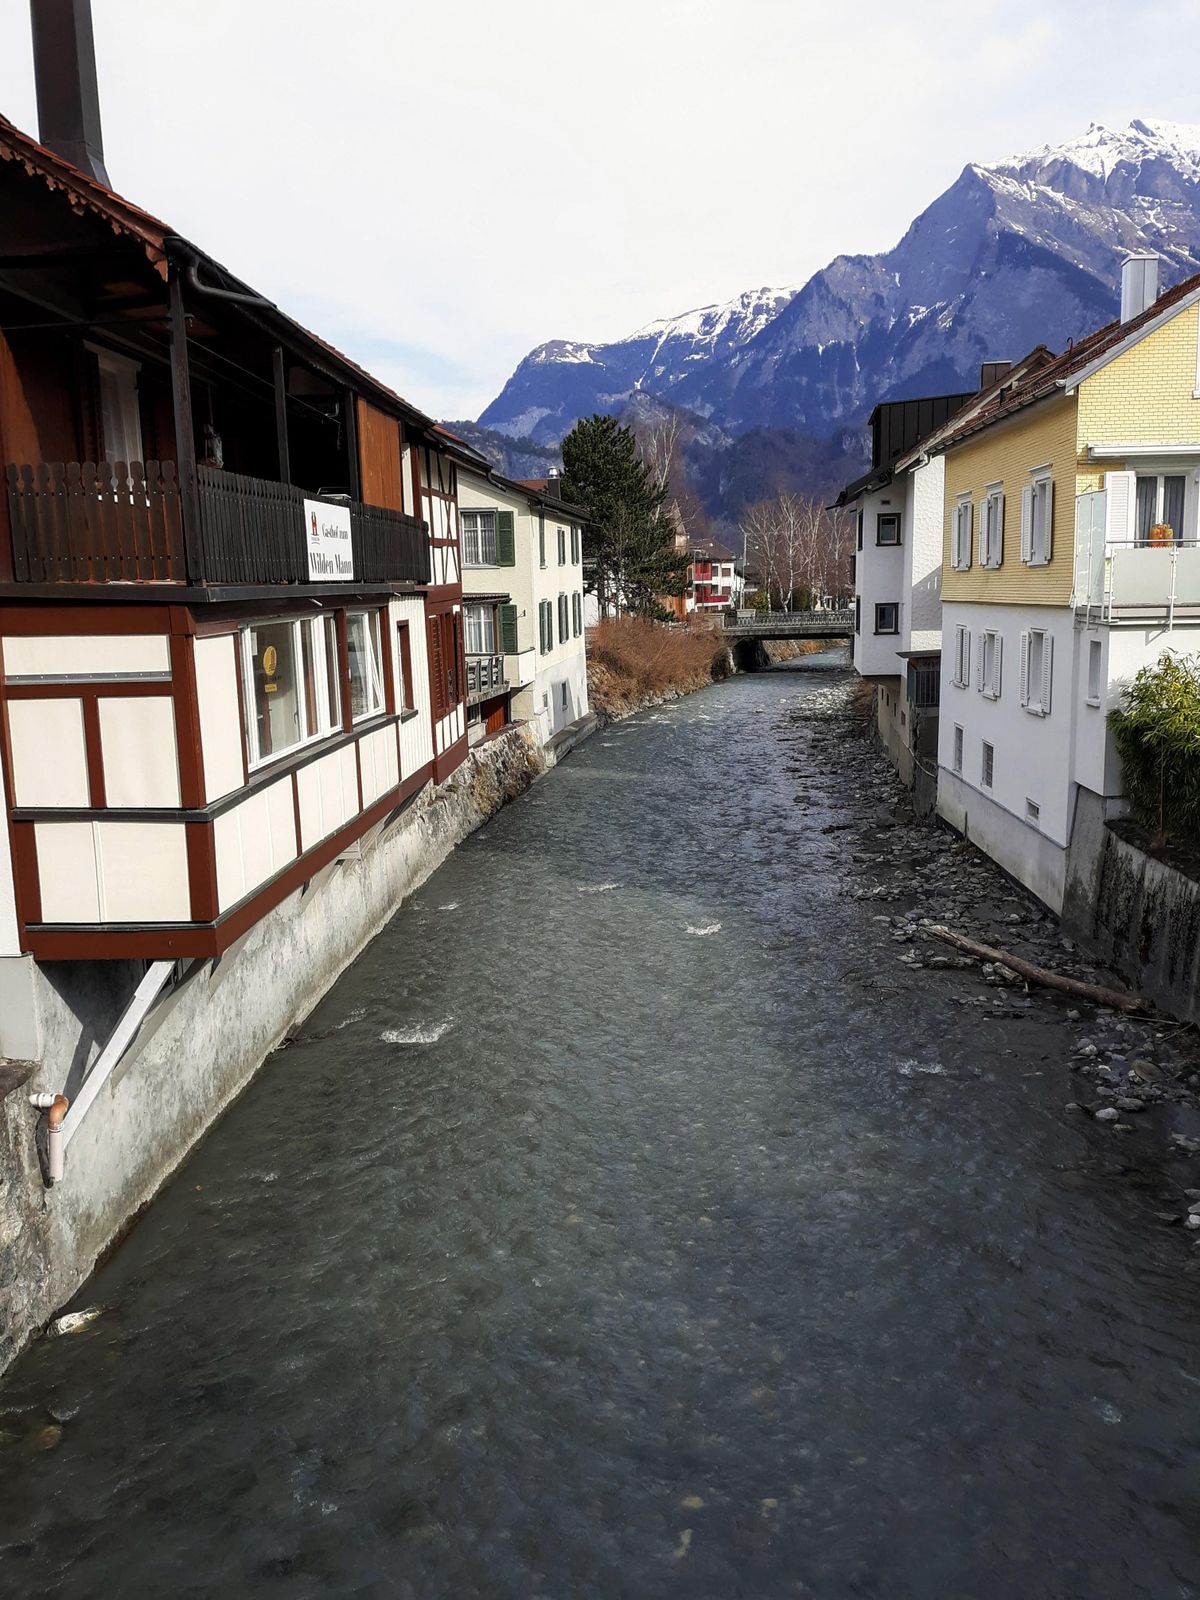 The River Tamina cuts through Bad Ragaz on the way to its nearby confluence with the Rhine. A hiking trail leads to Taminaschlucht, a deep gorge carved by rushing waters. (Walter Nicklin / Walter Nicklin)